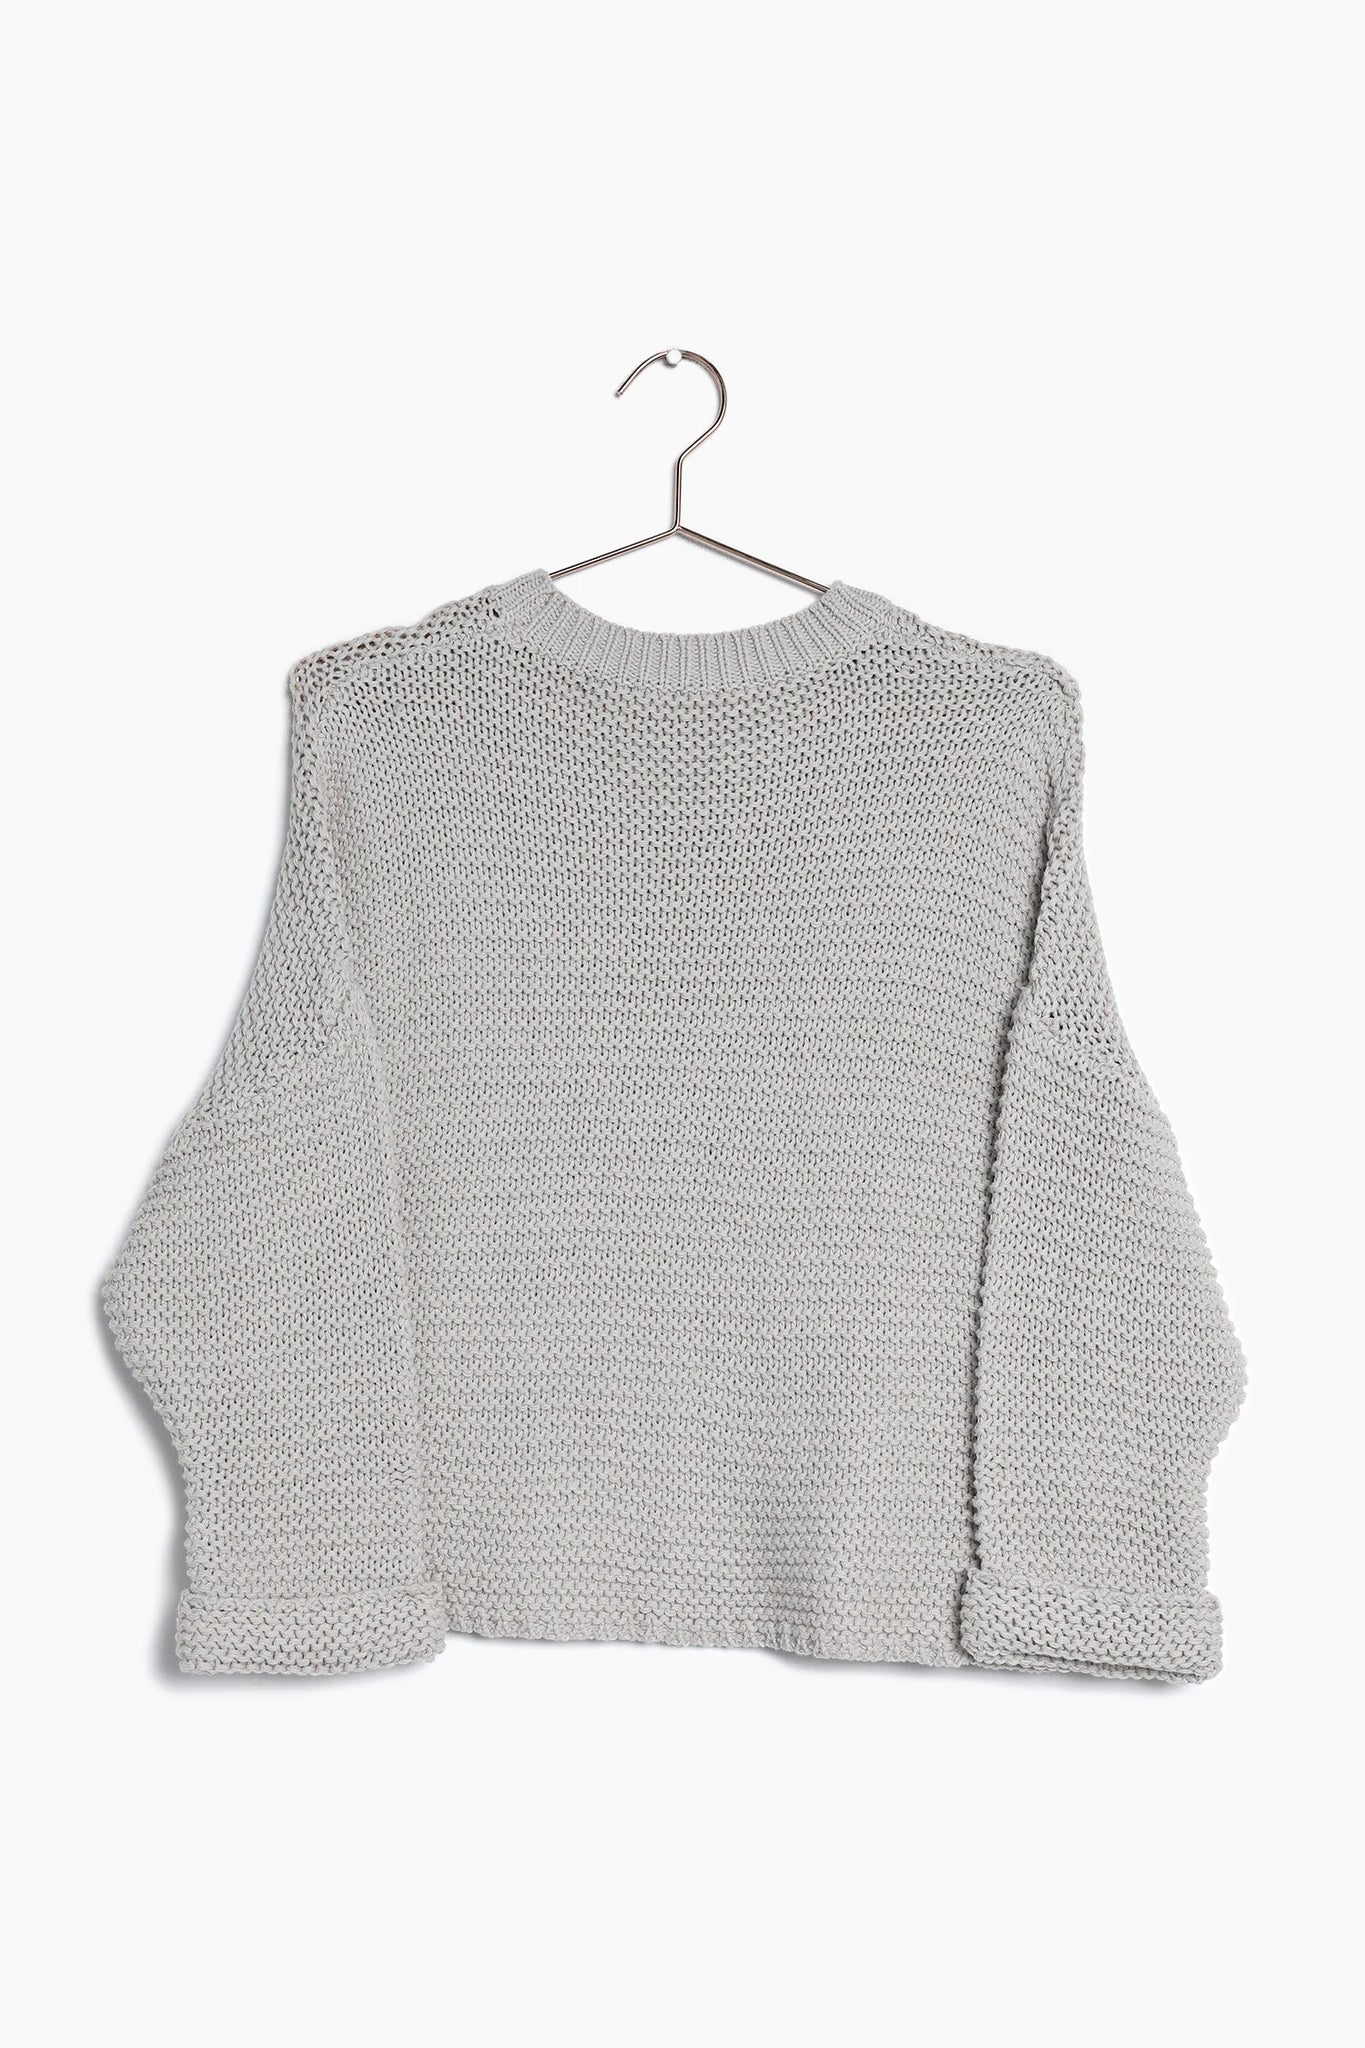 The Sail Sweater